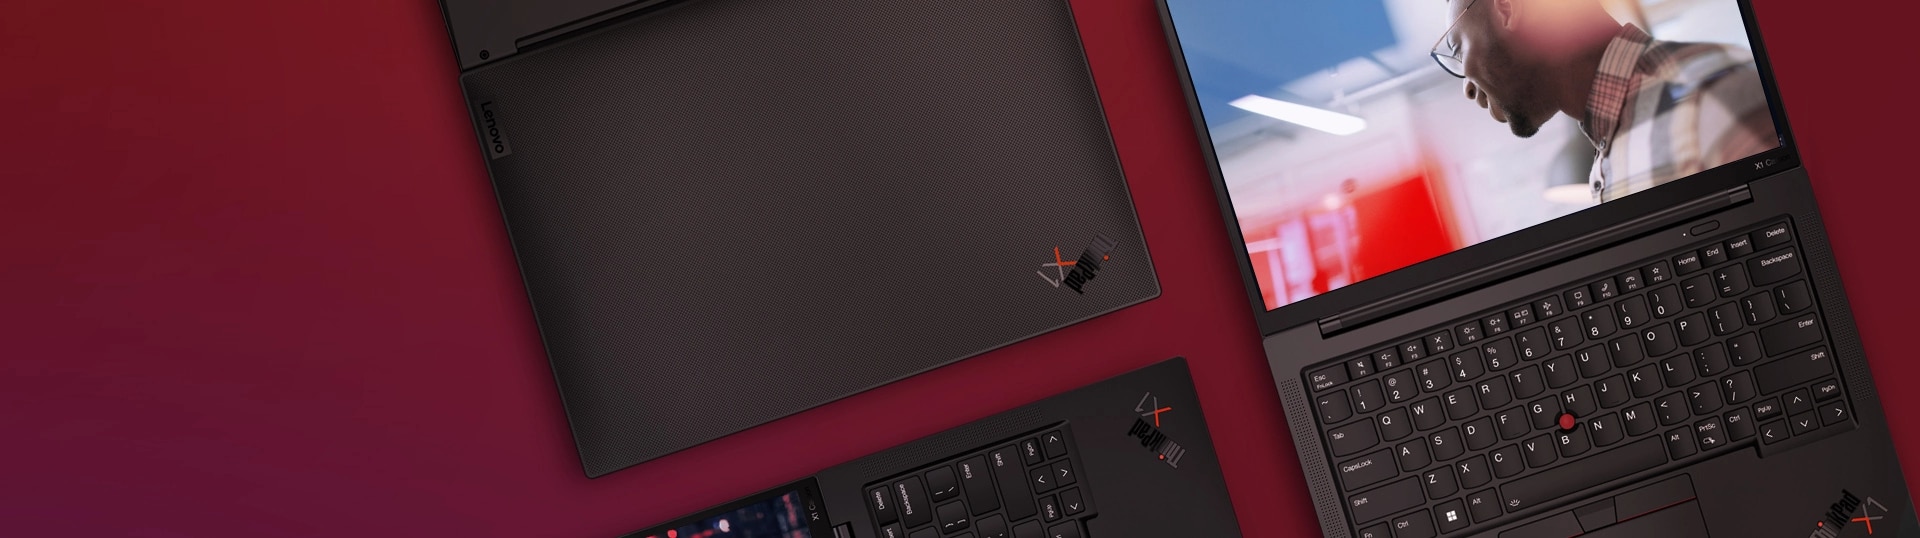 ThinkPad X1 Cardon featured in 3 different modes, completely open and close.